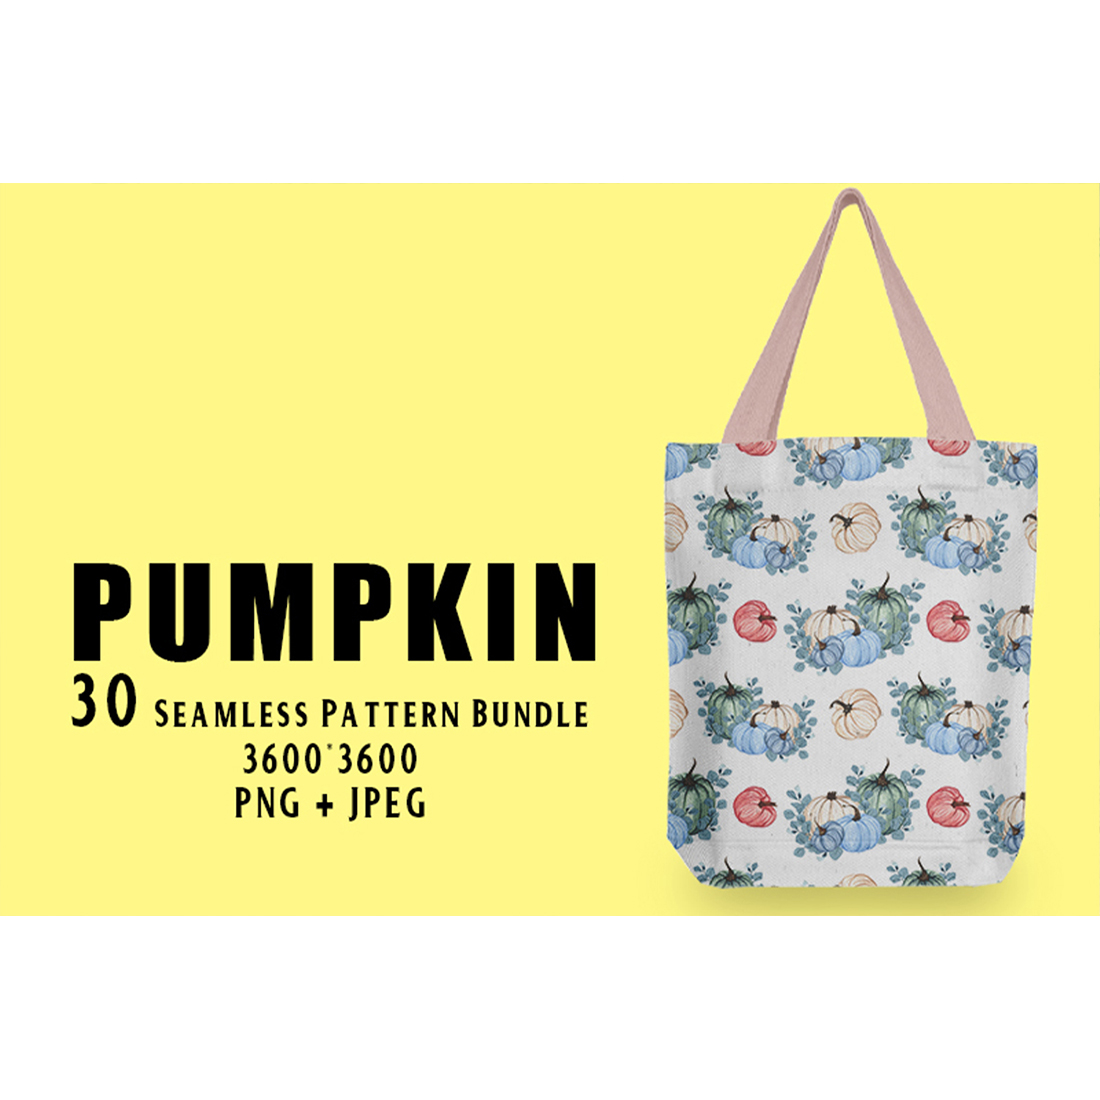 Image of bag with colorful patterns with pumpkin